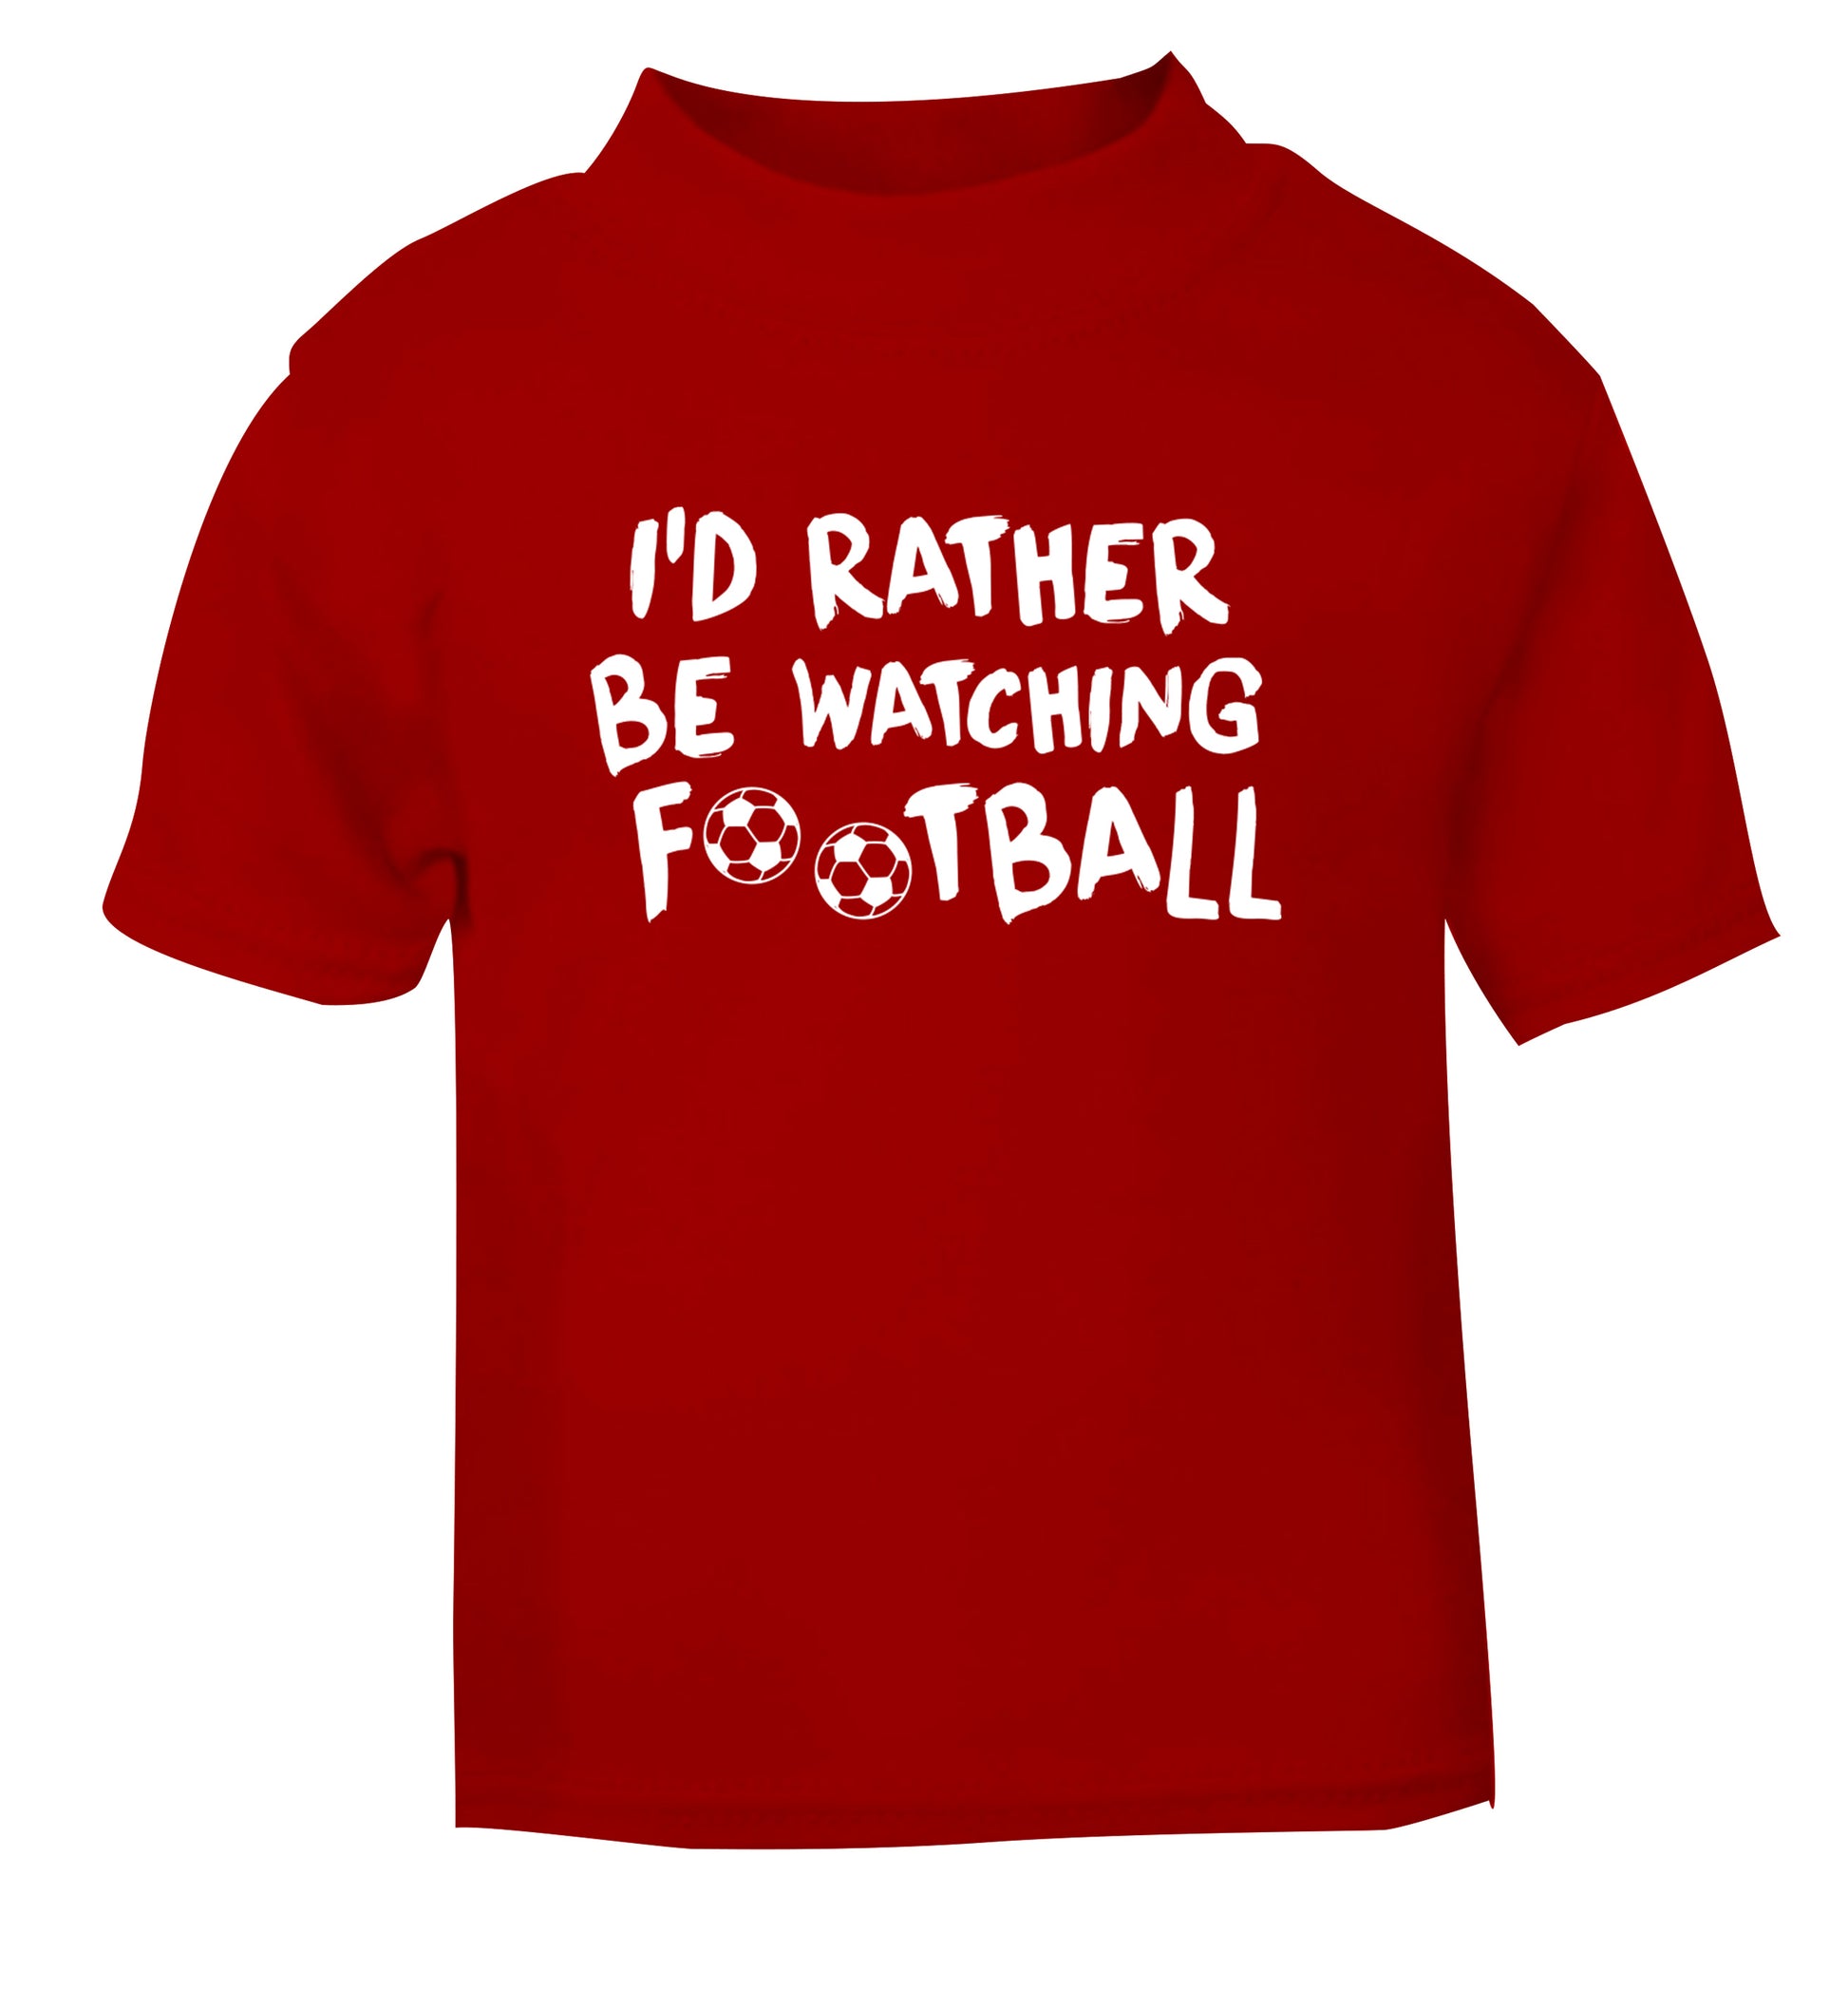 I'd rather be watching football red Baby Toddler Tshirt 2 Years